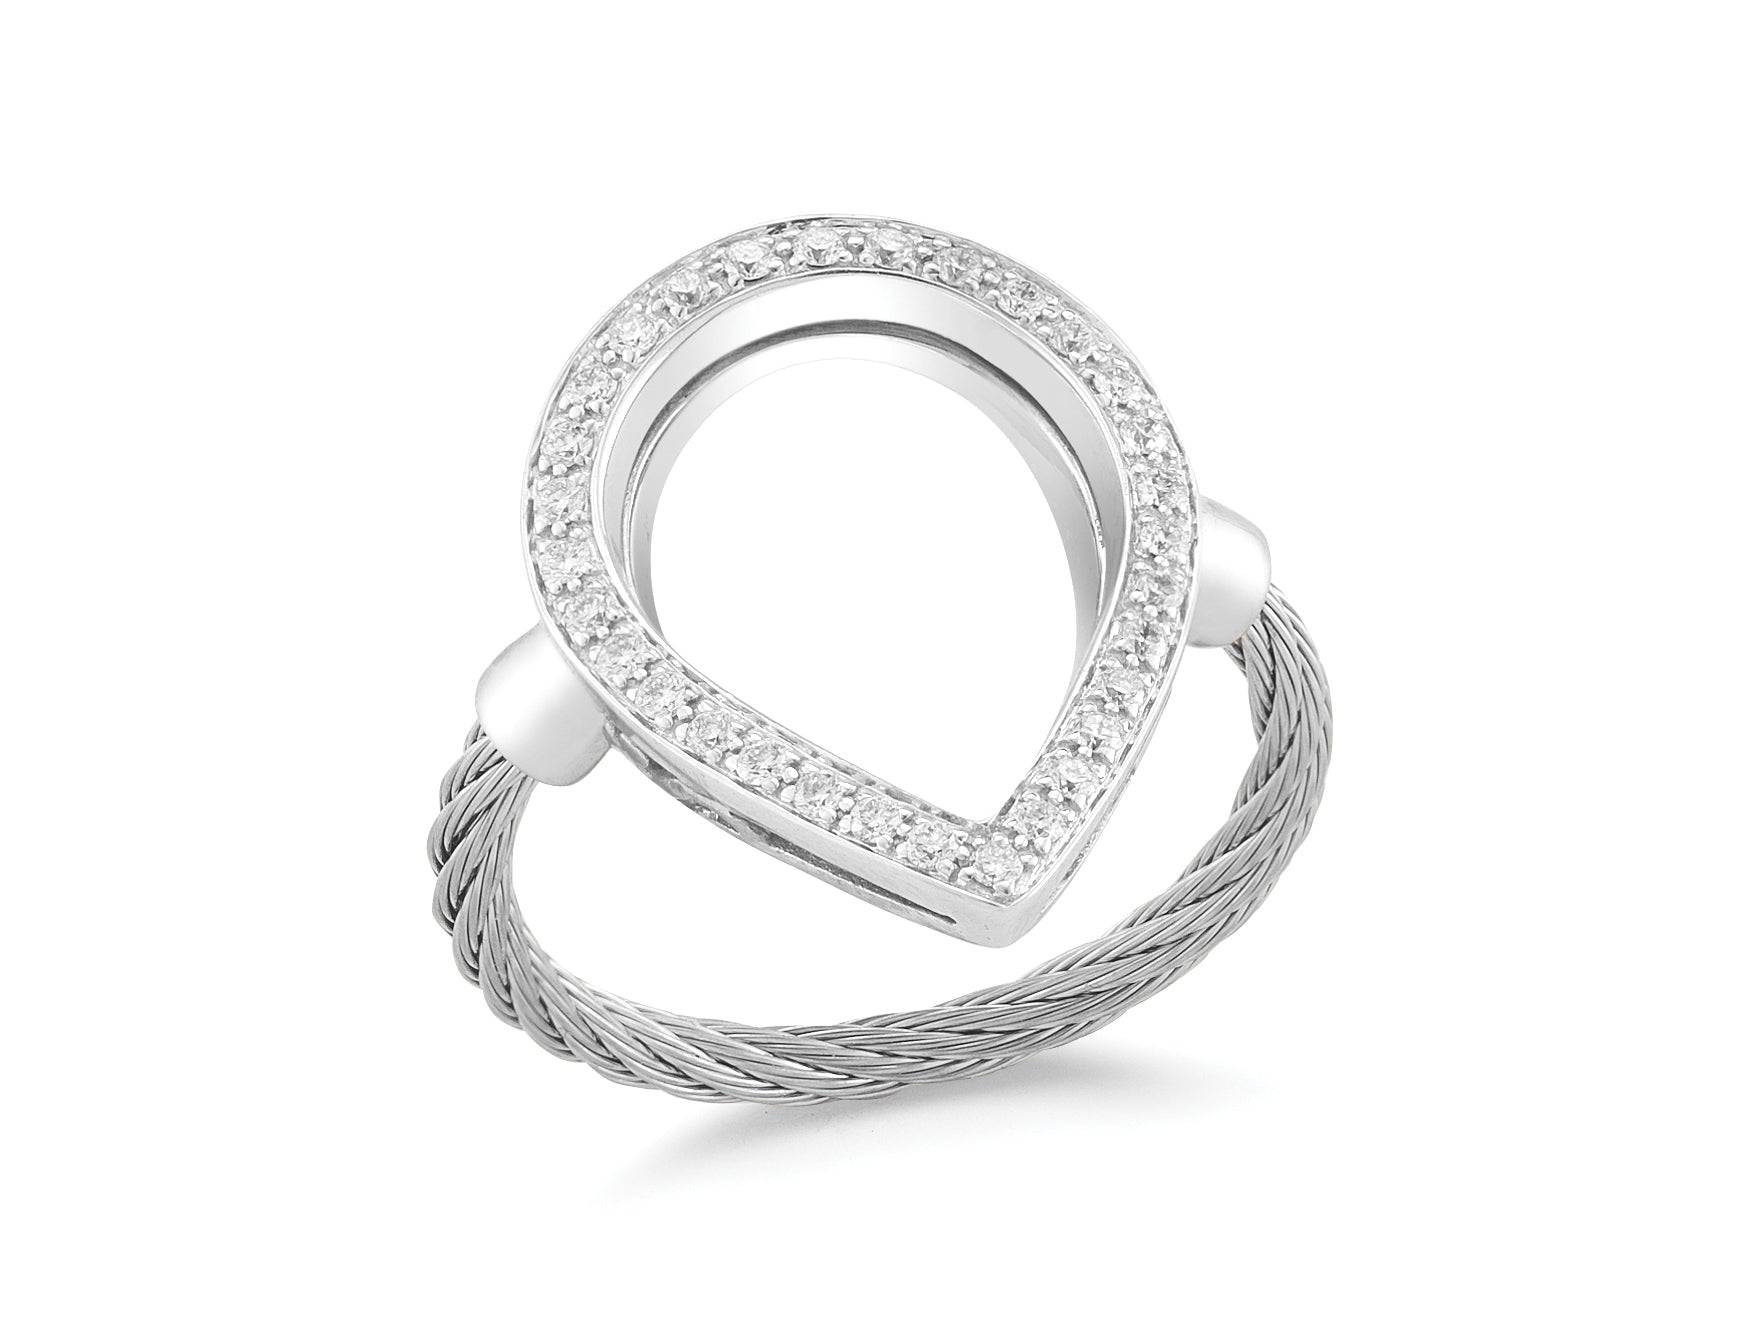 Alor Grey cable, 18 karat White Gold, 0.26 total carat weight Diamonds and stainless steel. Imported.